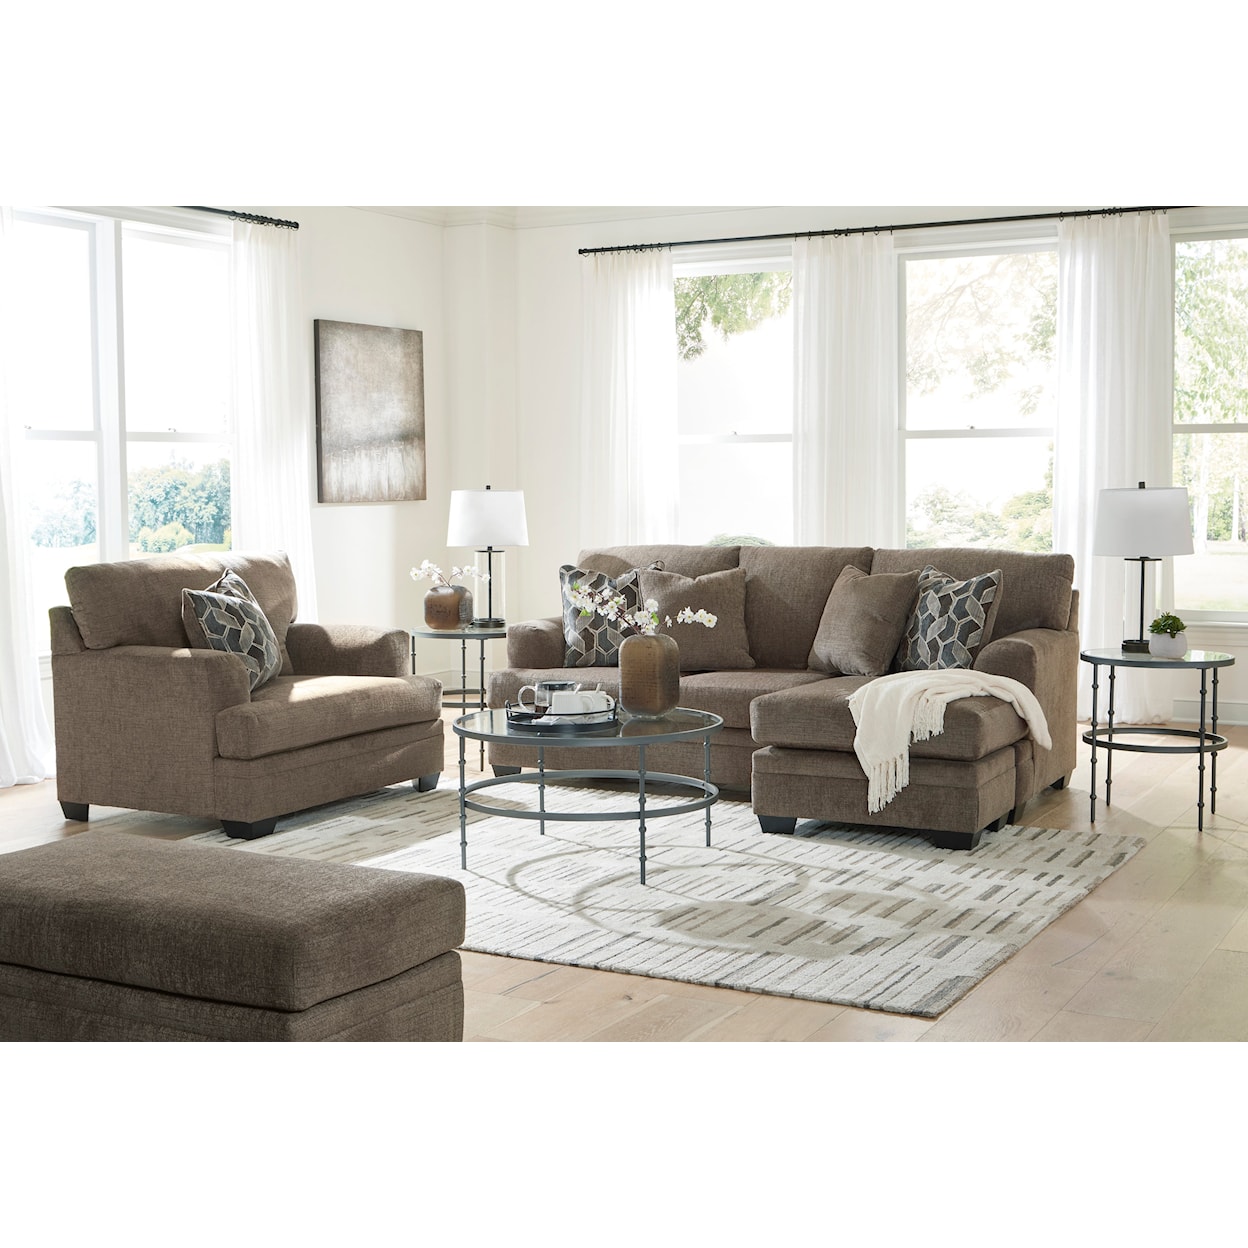 Signature Stewart Sofa Chaise, Oversized Chair and Ottoman